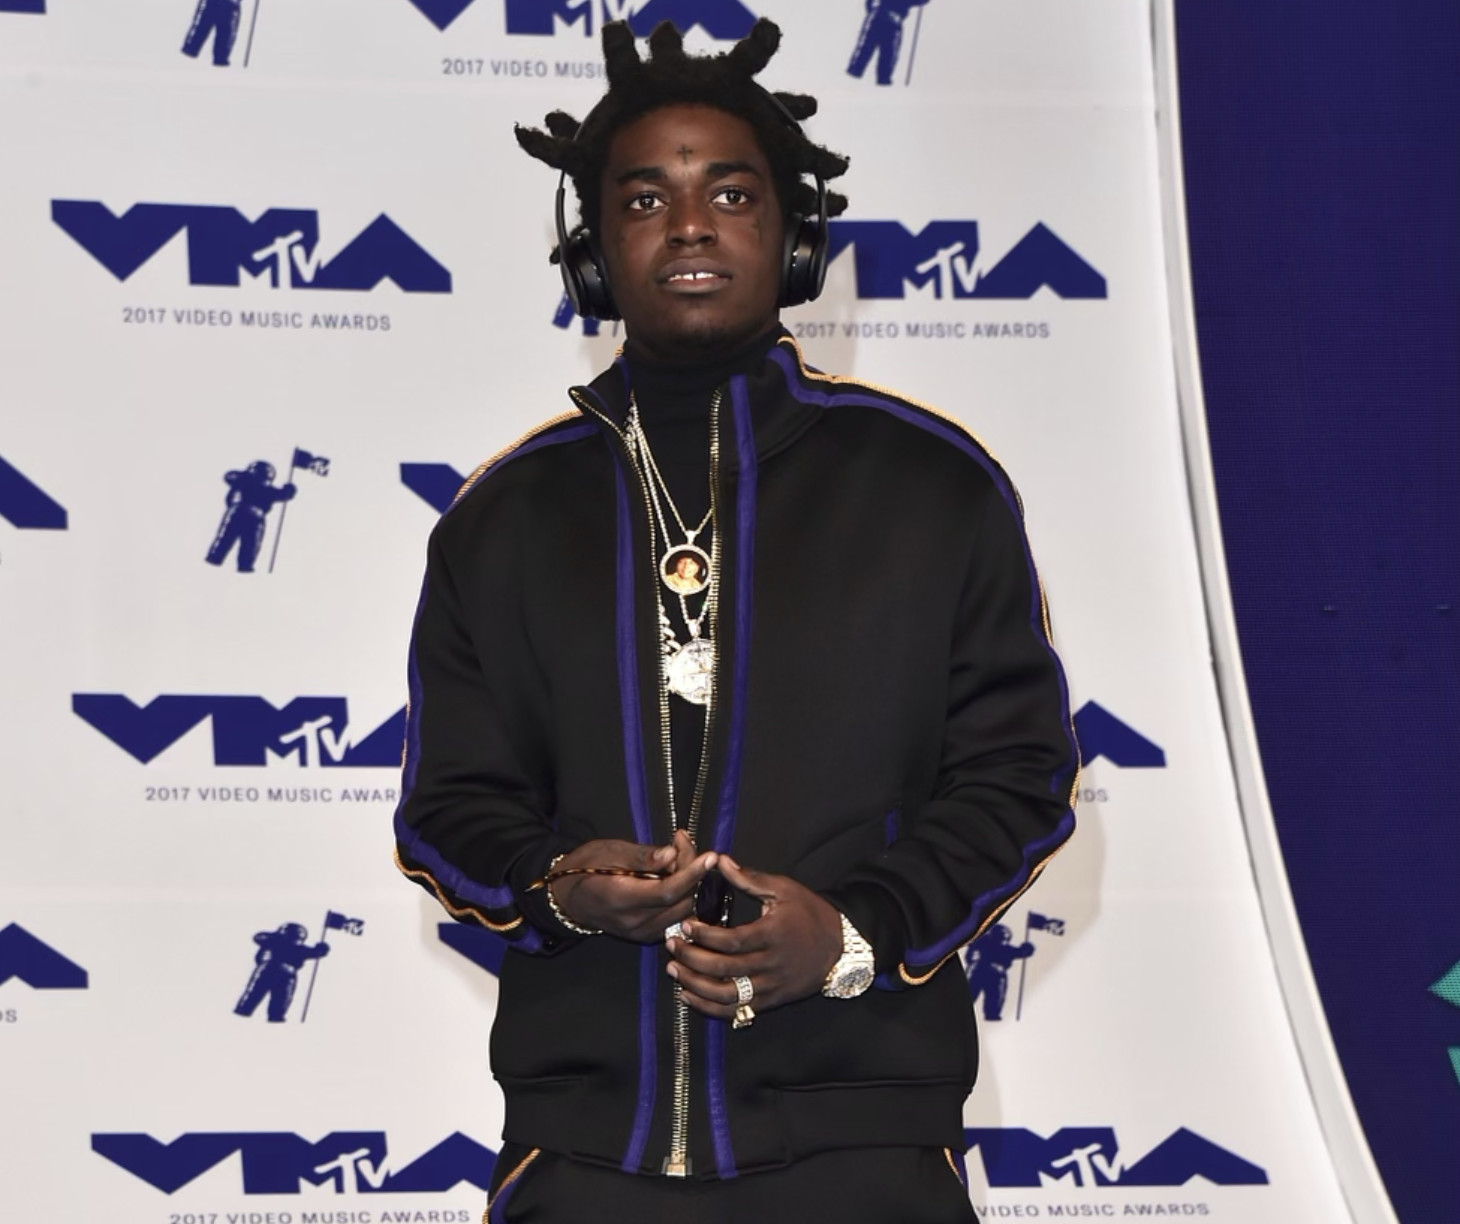 Kodak Black Allegedly Shot At Justin Bieber’s Afterparty, Rapper Received Non-Life-Threatening Injuries